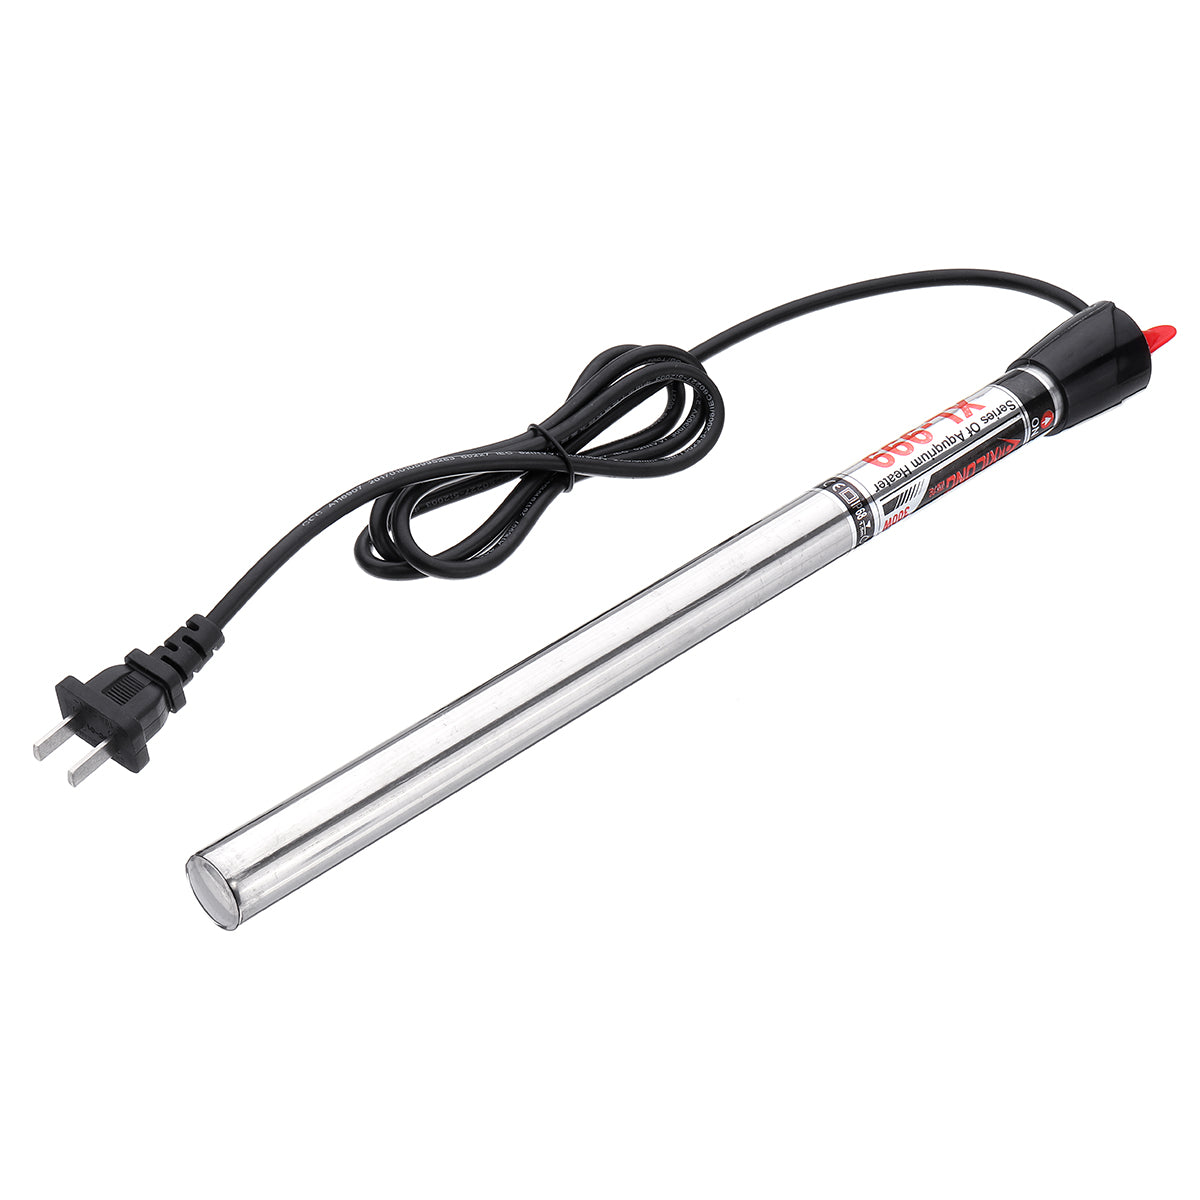 A Go Green Aquaponics Submersible 300W Heater with a plug attached to it.